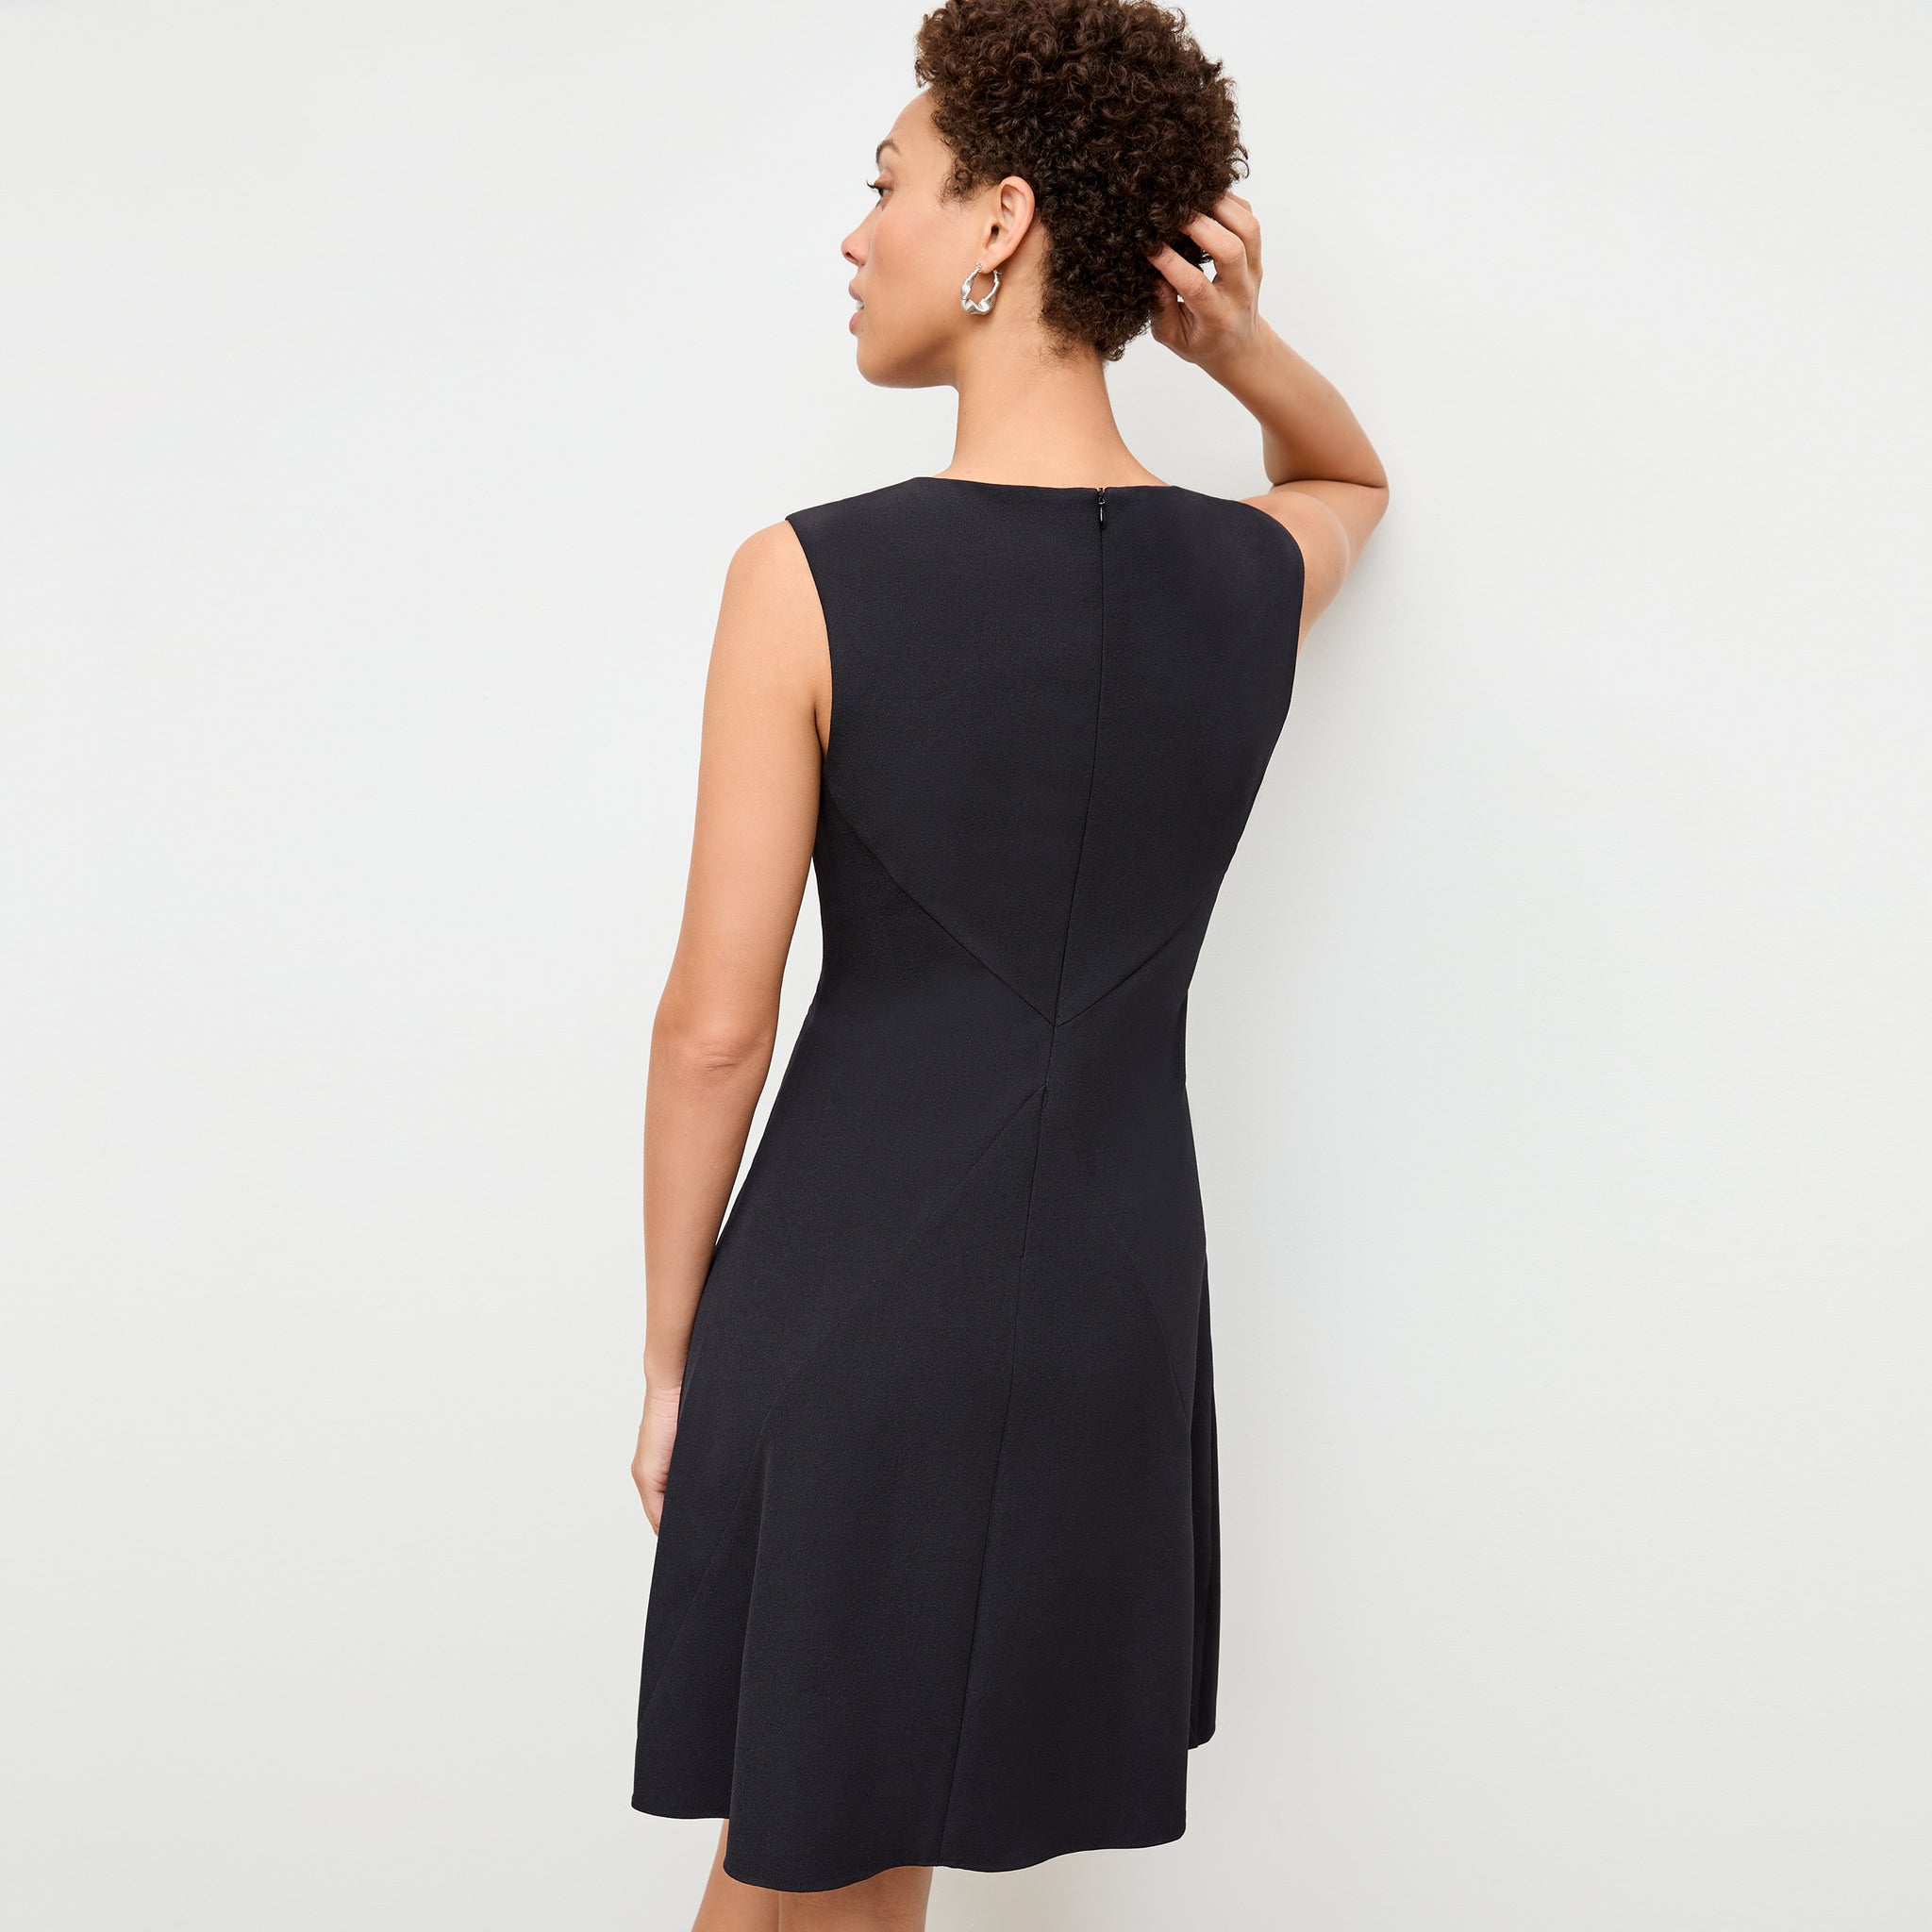 back image of a woman wearing the pauline dress in black 